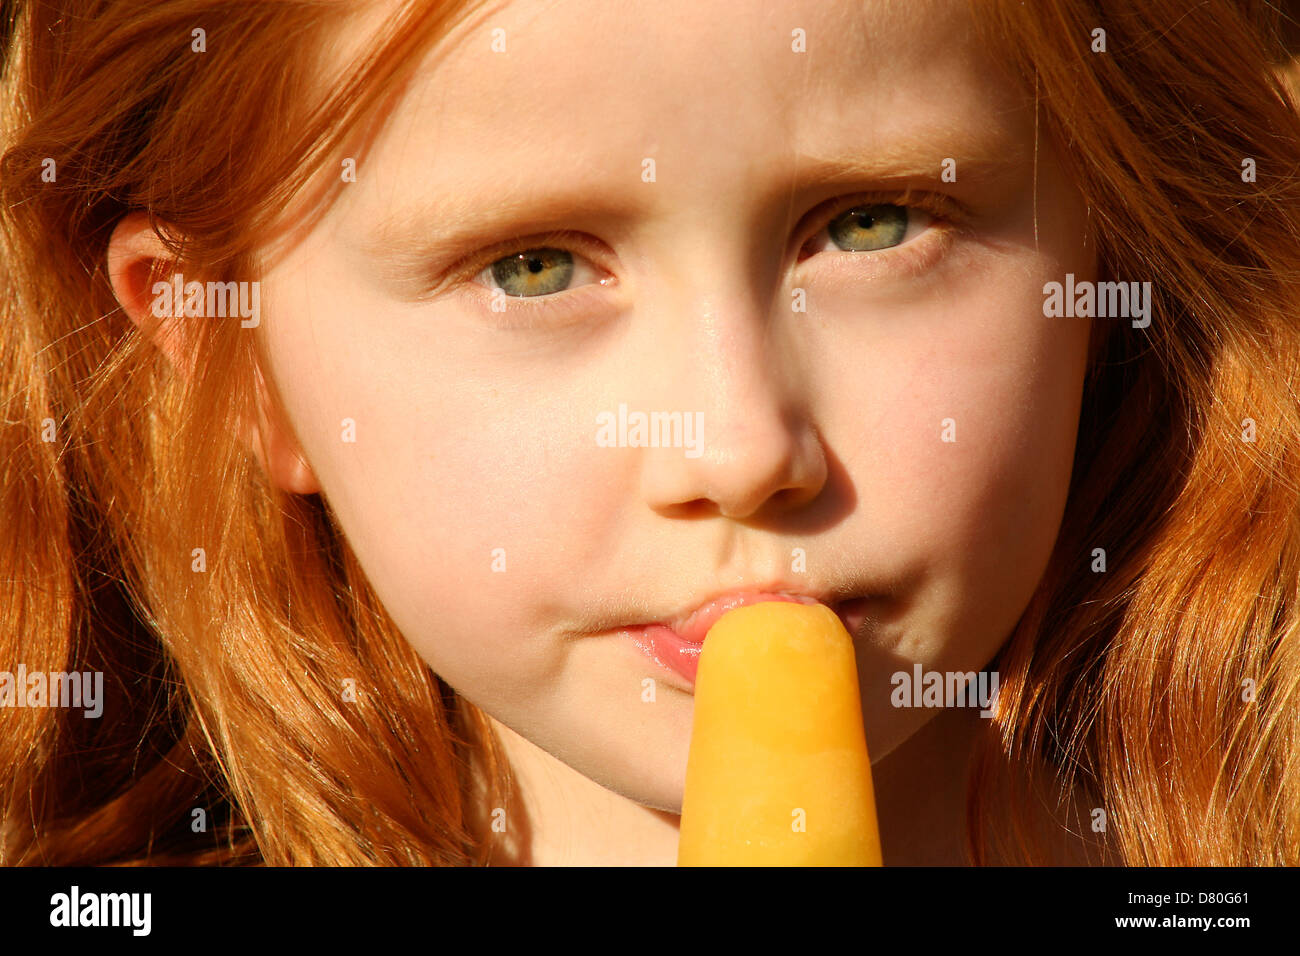 Little girl with red hair eating an orange ice lolly, with the sun on her face Stock Photo